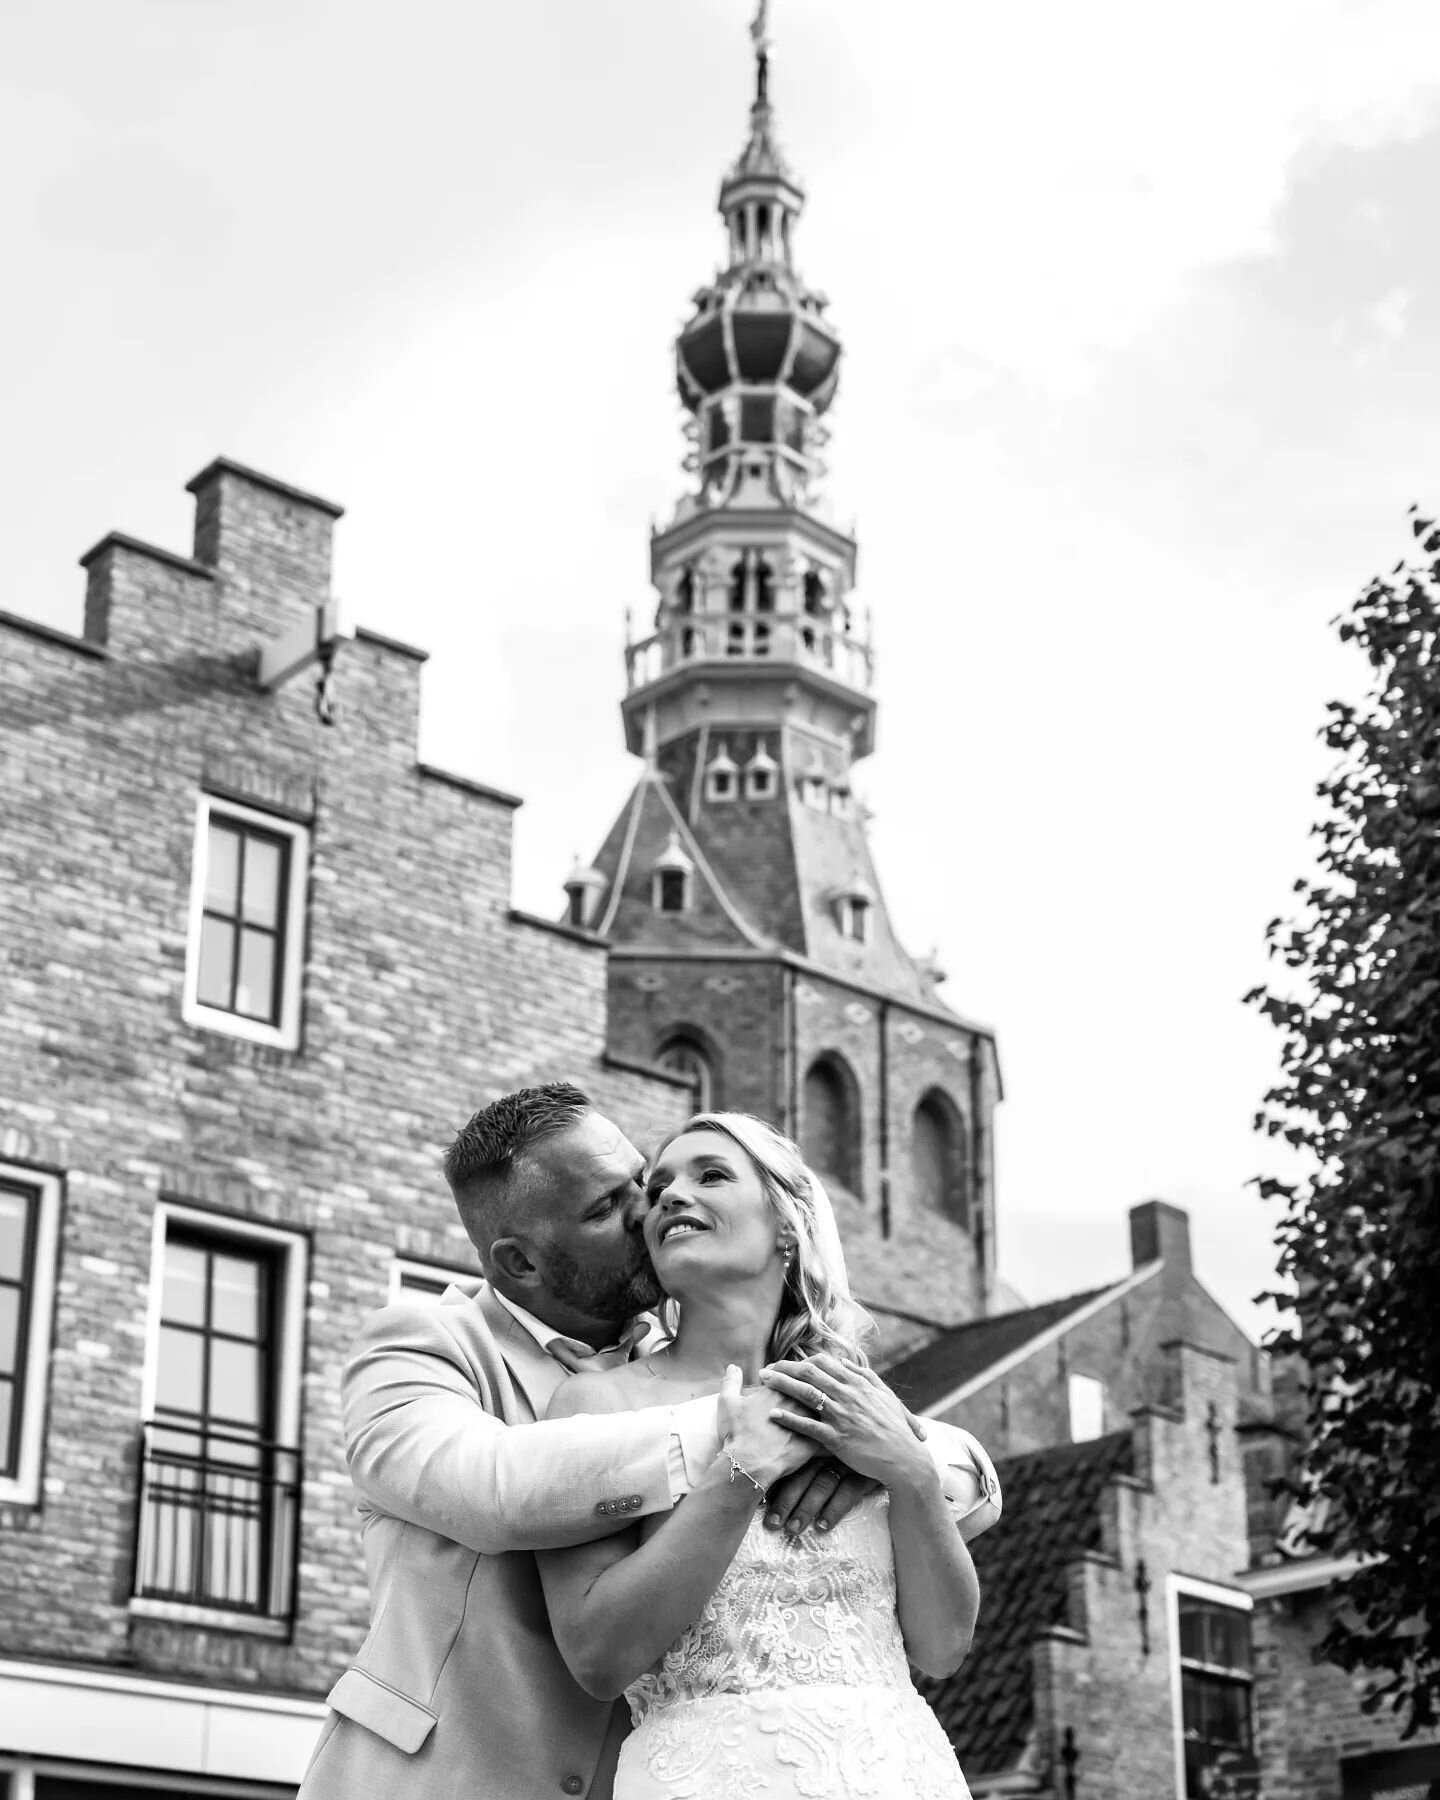 I always love a couple that wants cityscapes as backdrops for some spectacular images... love me some dutch architecture...
.
.
#trouwfotografie #bruidsfotograaf #bruiloftfotograaf #dutchphotographer  #bruidsfotograafzuidholland #bruidsfotograafzeela